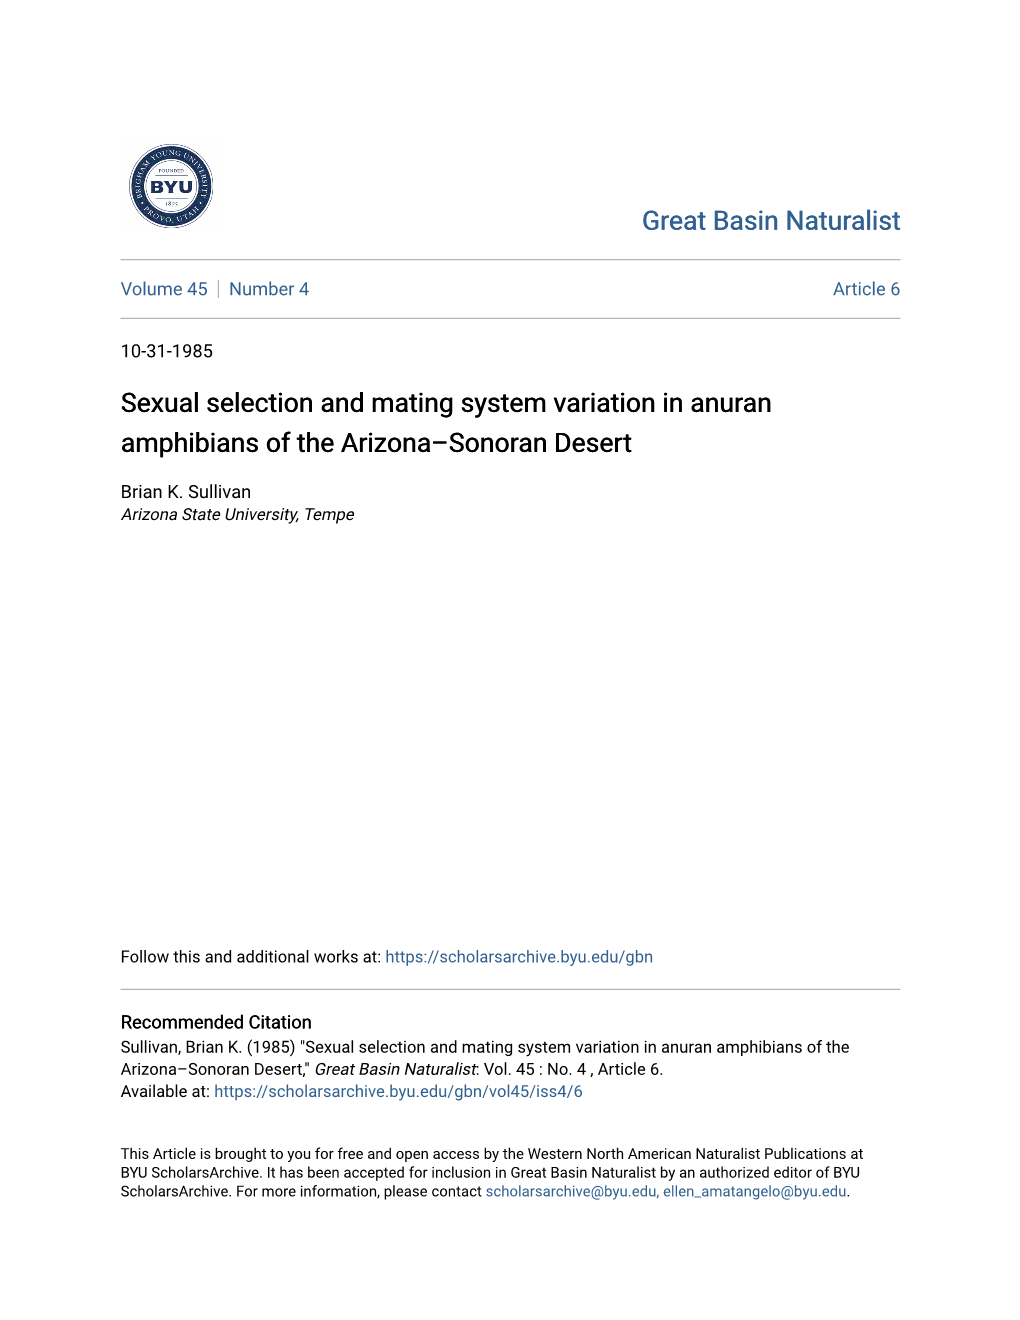 Sexual Selection and Mating System Variation in Anuran Amphibians of the Arizona–Sonoran Desert